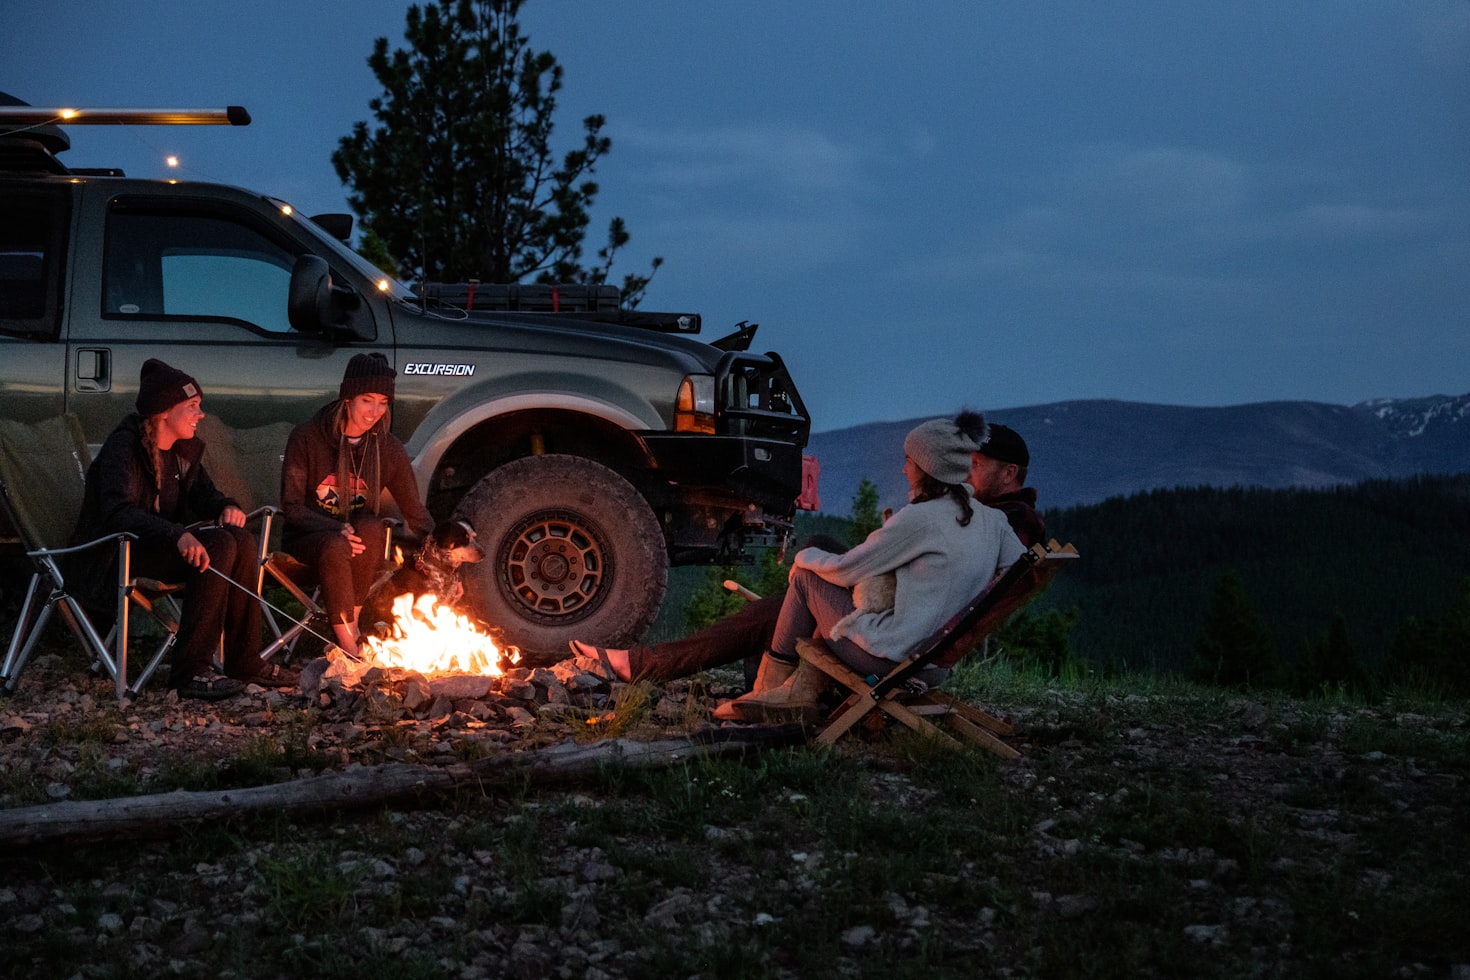 People Sit by the Fire Next to Campervan